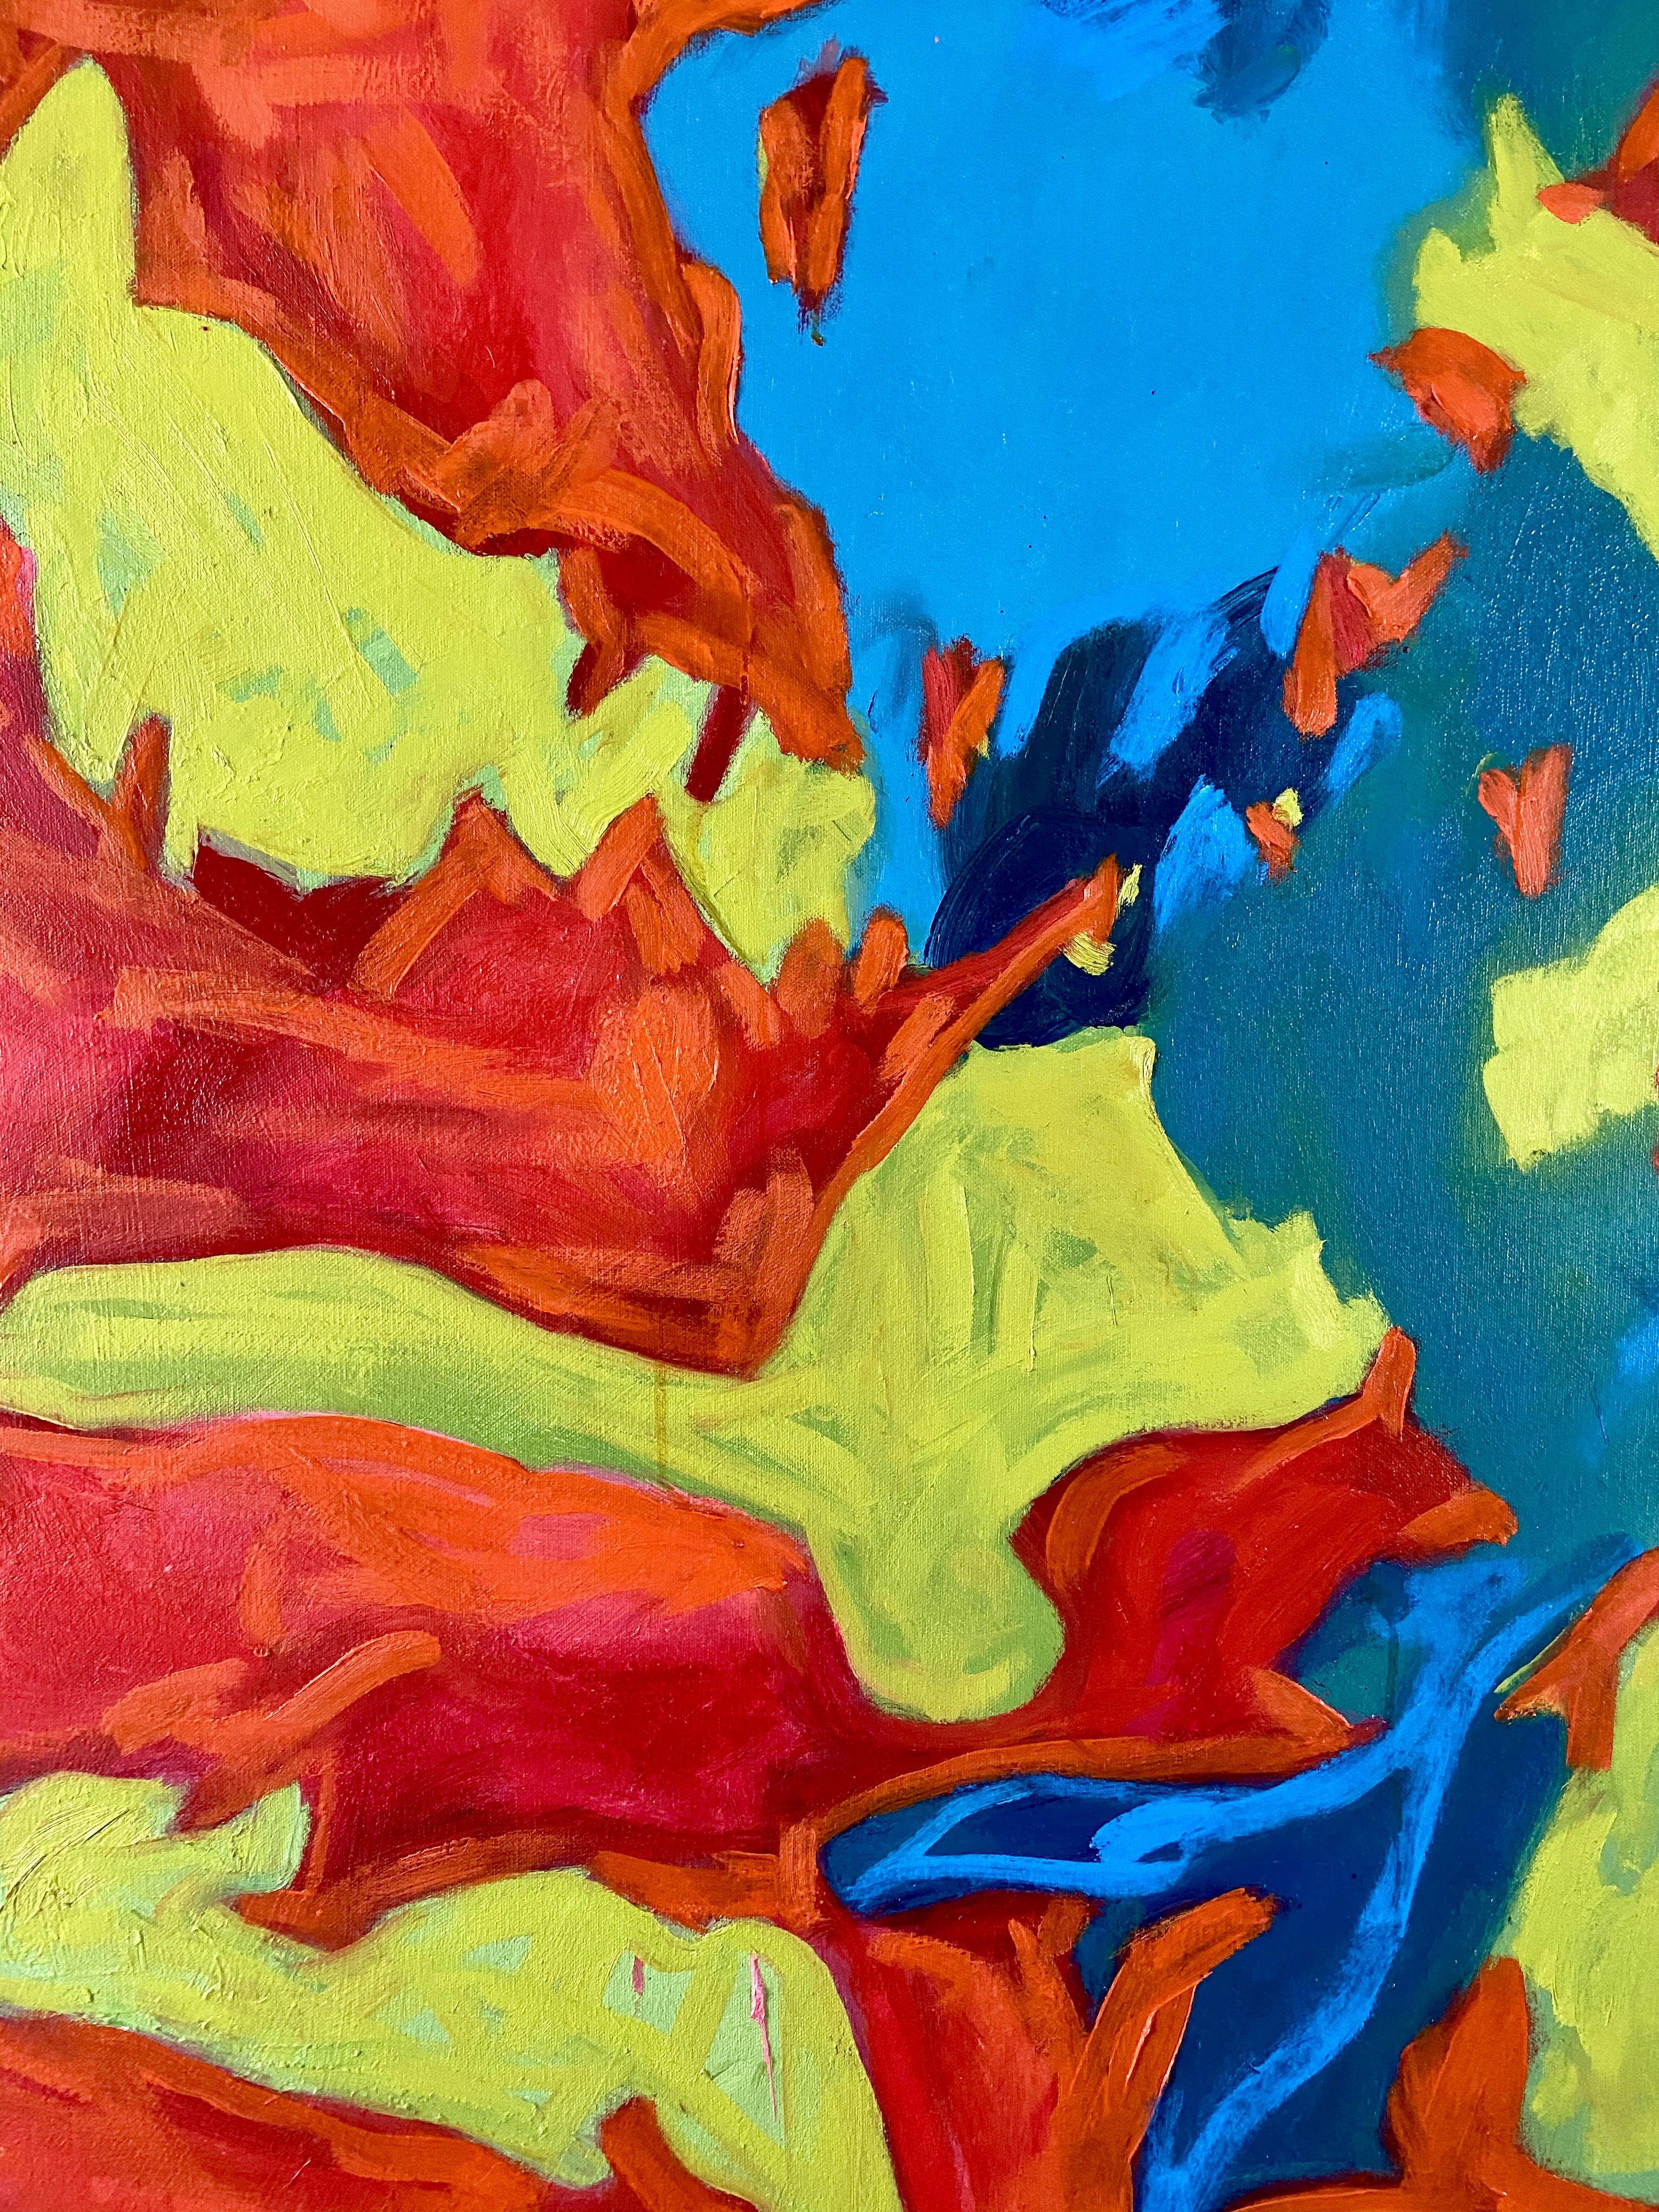 Oil on canvas inspire by nature, travels and other observations. My abstract paintings are all about creating excitement for the viewer through concentrated exploration. Each painting is inspired by nature, travels, or imagination and created to